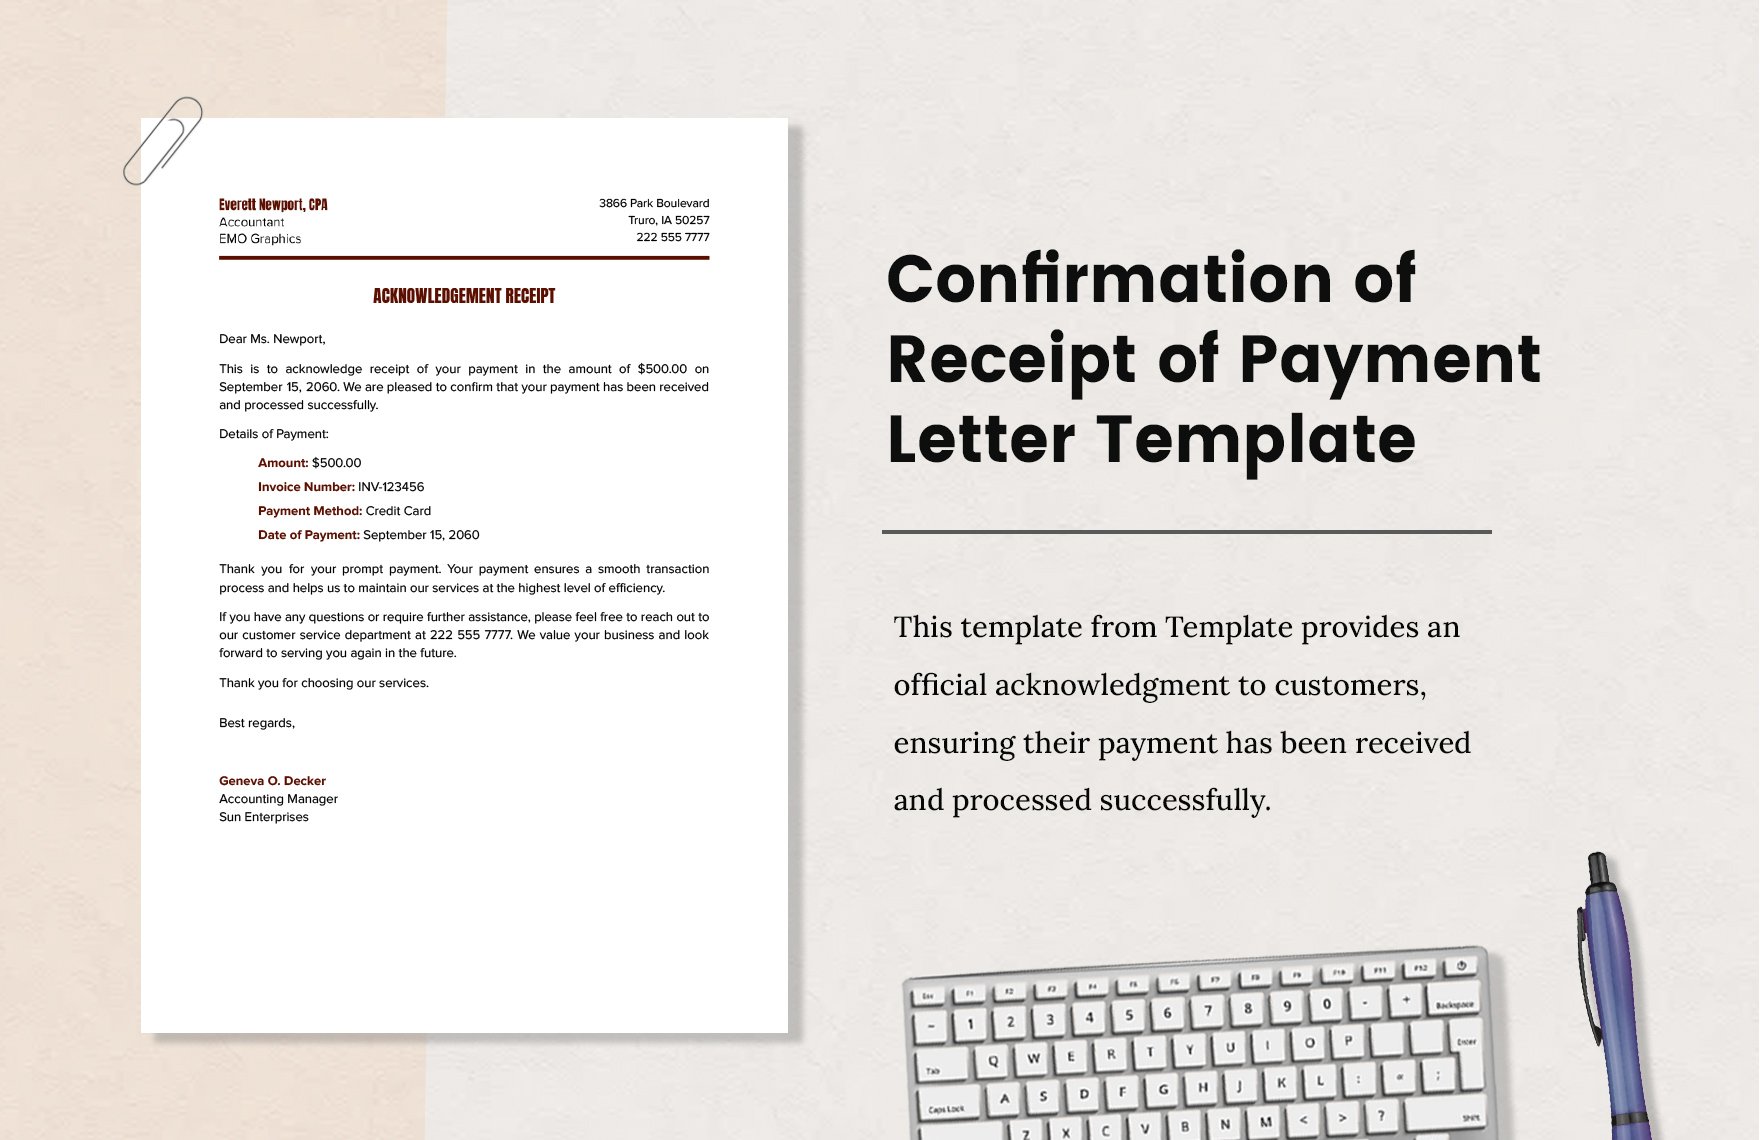 Confirmation of Receipt of Payment Letter